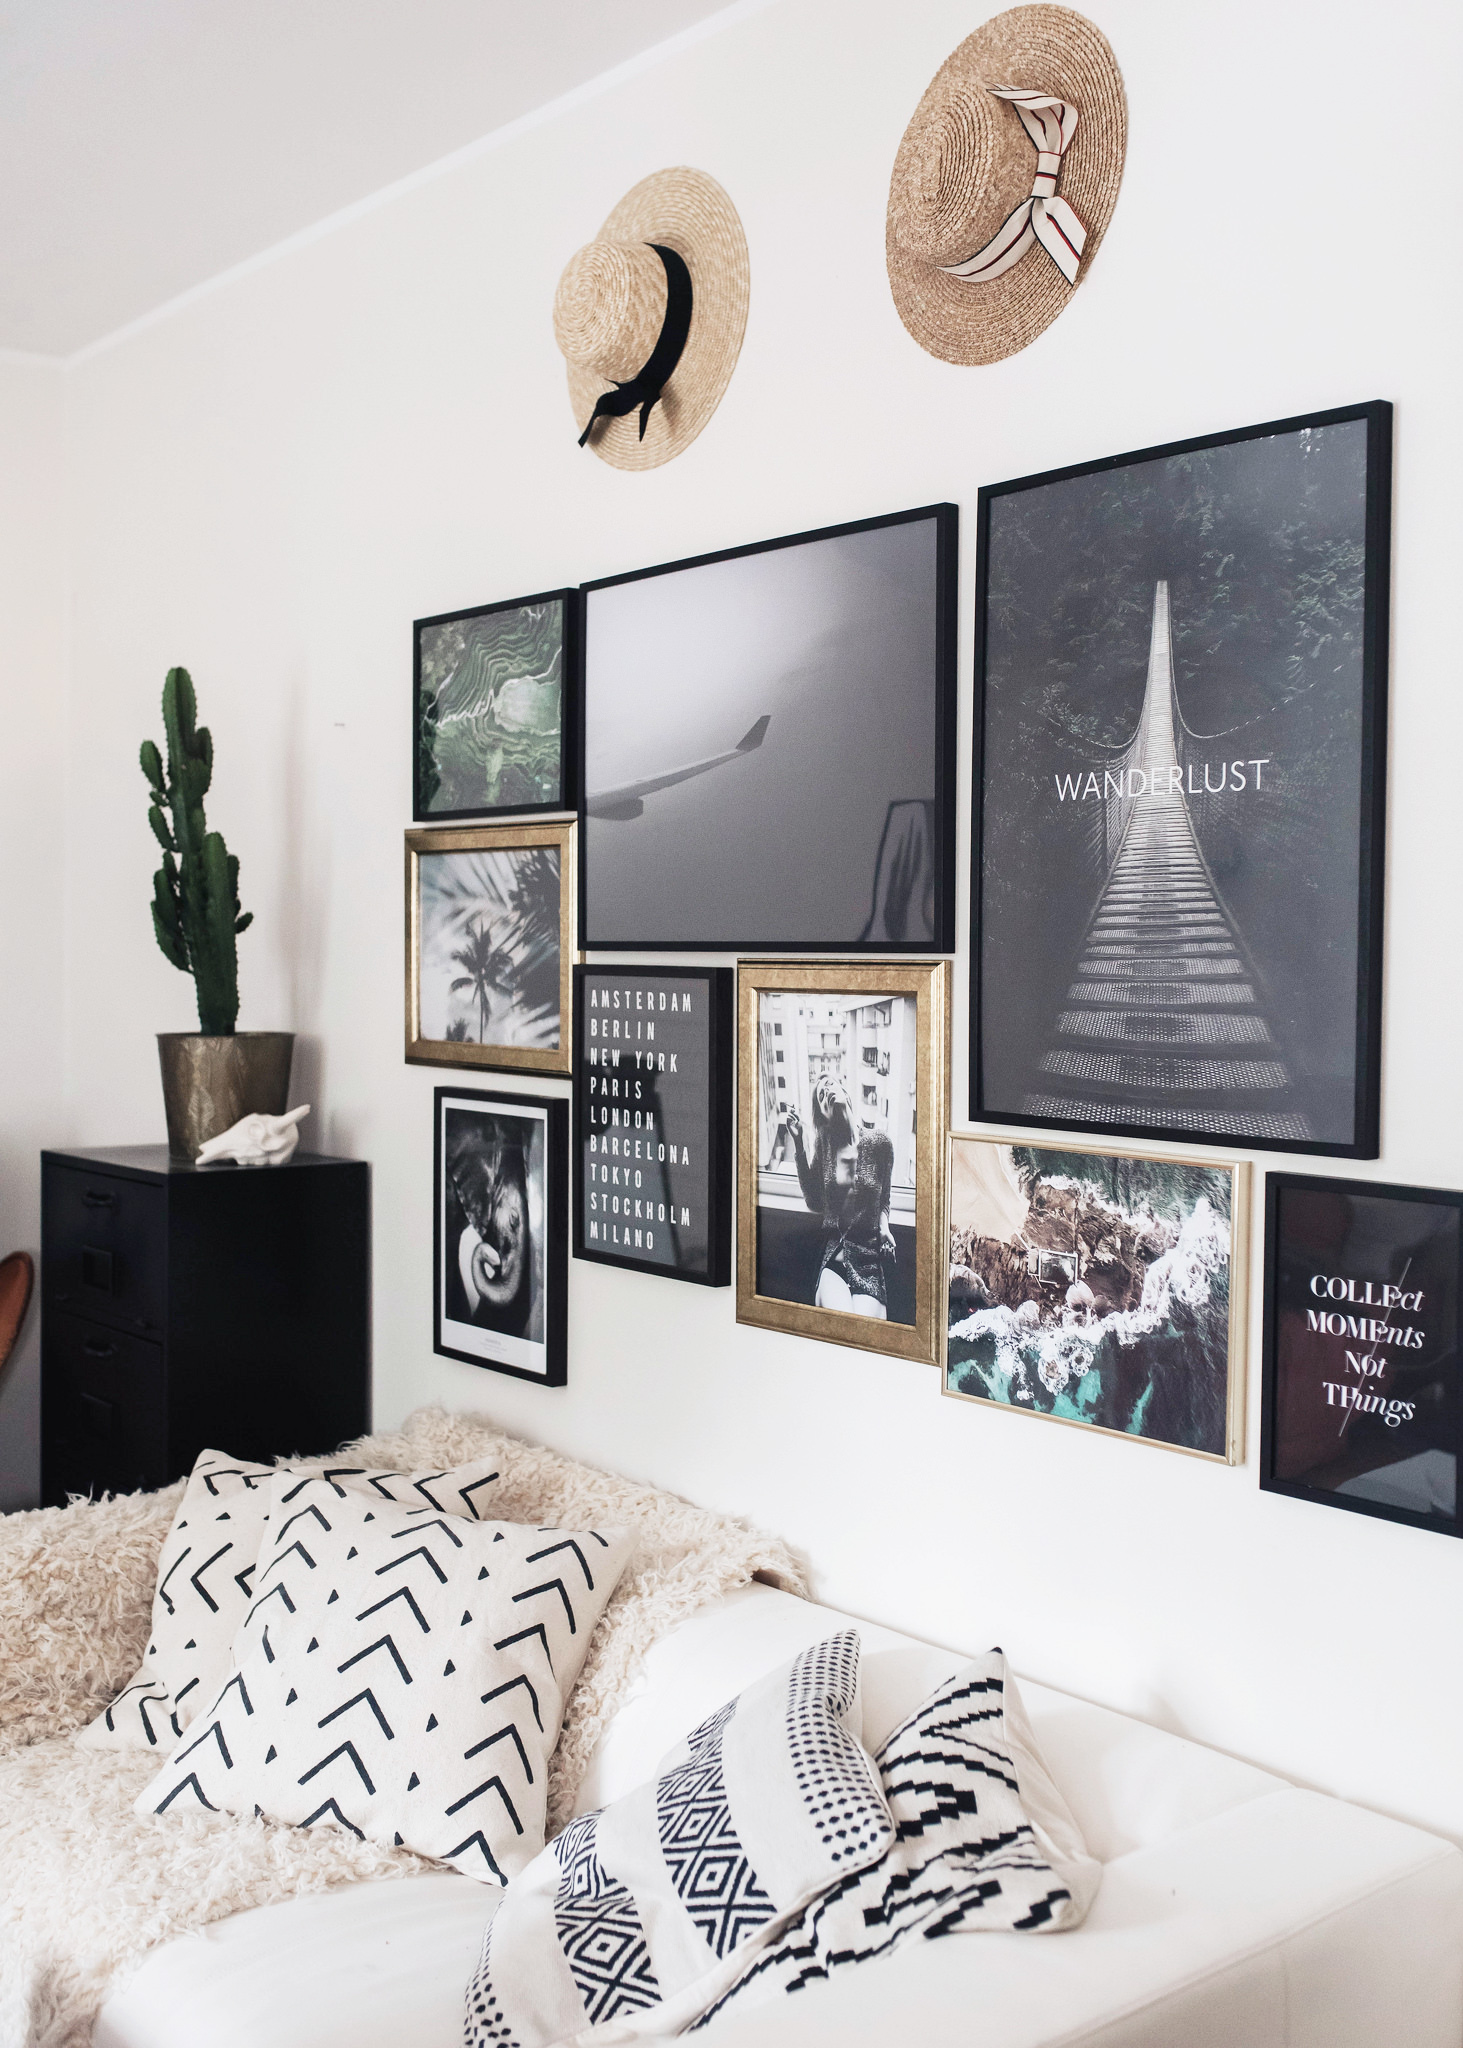 A darker gallery wall such as this is the perfect choice for white walls.